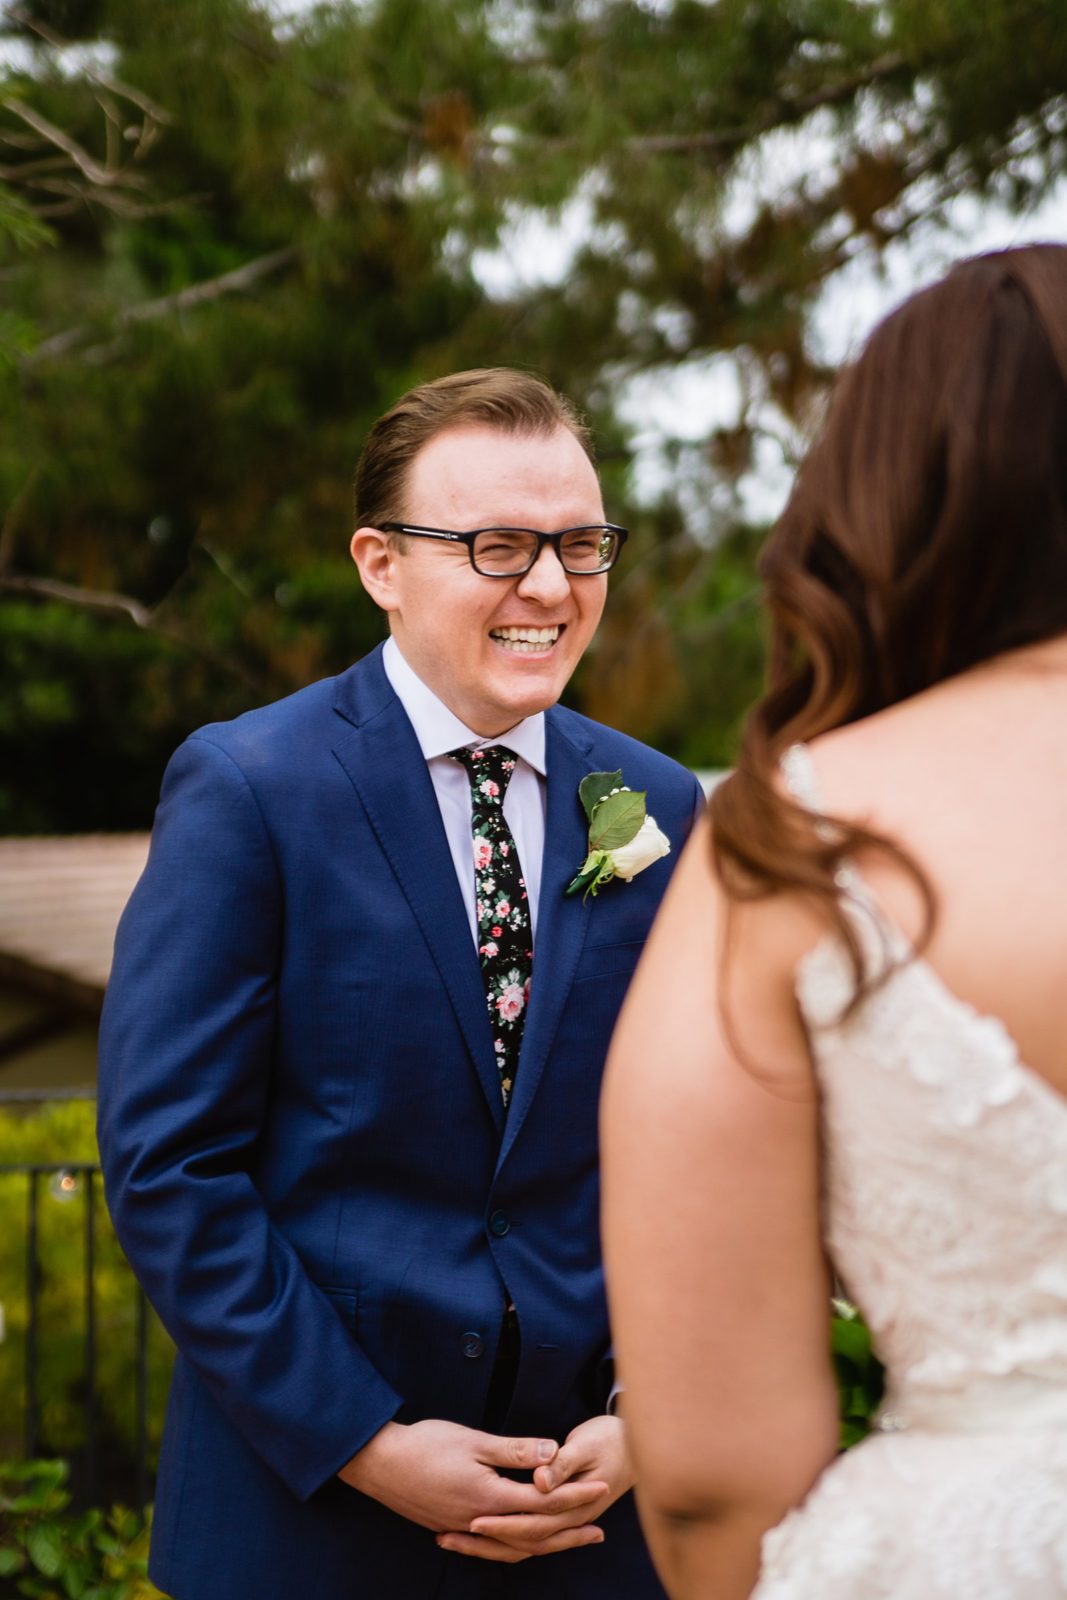 Bride and Groom's first look at The Wright House Provencal by Arizona wedding photographer PMA Photography.